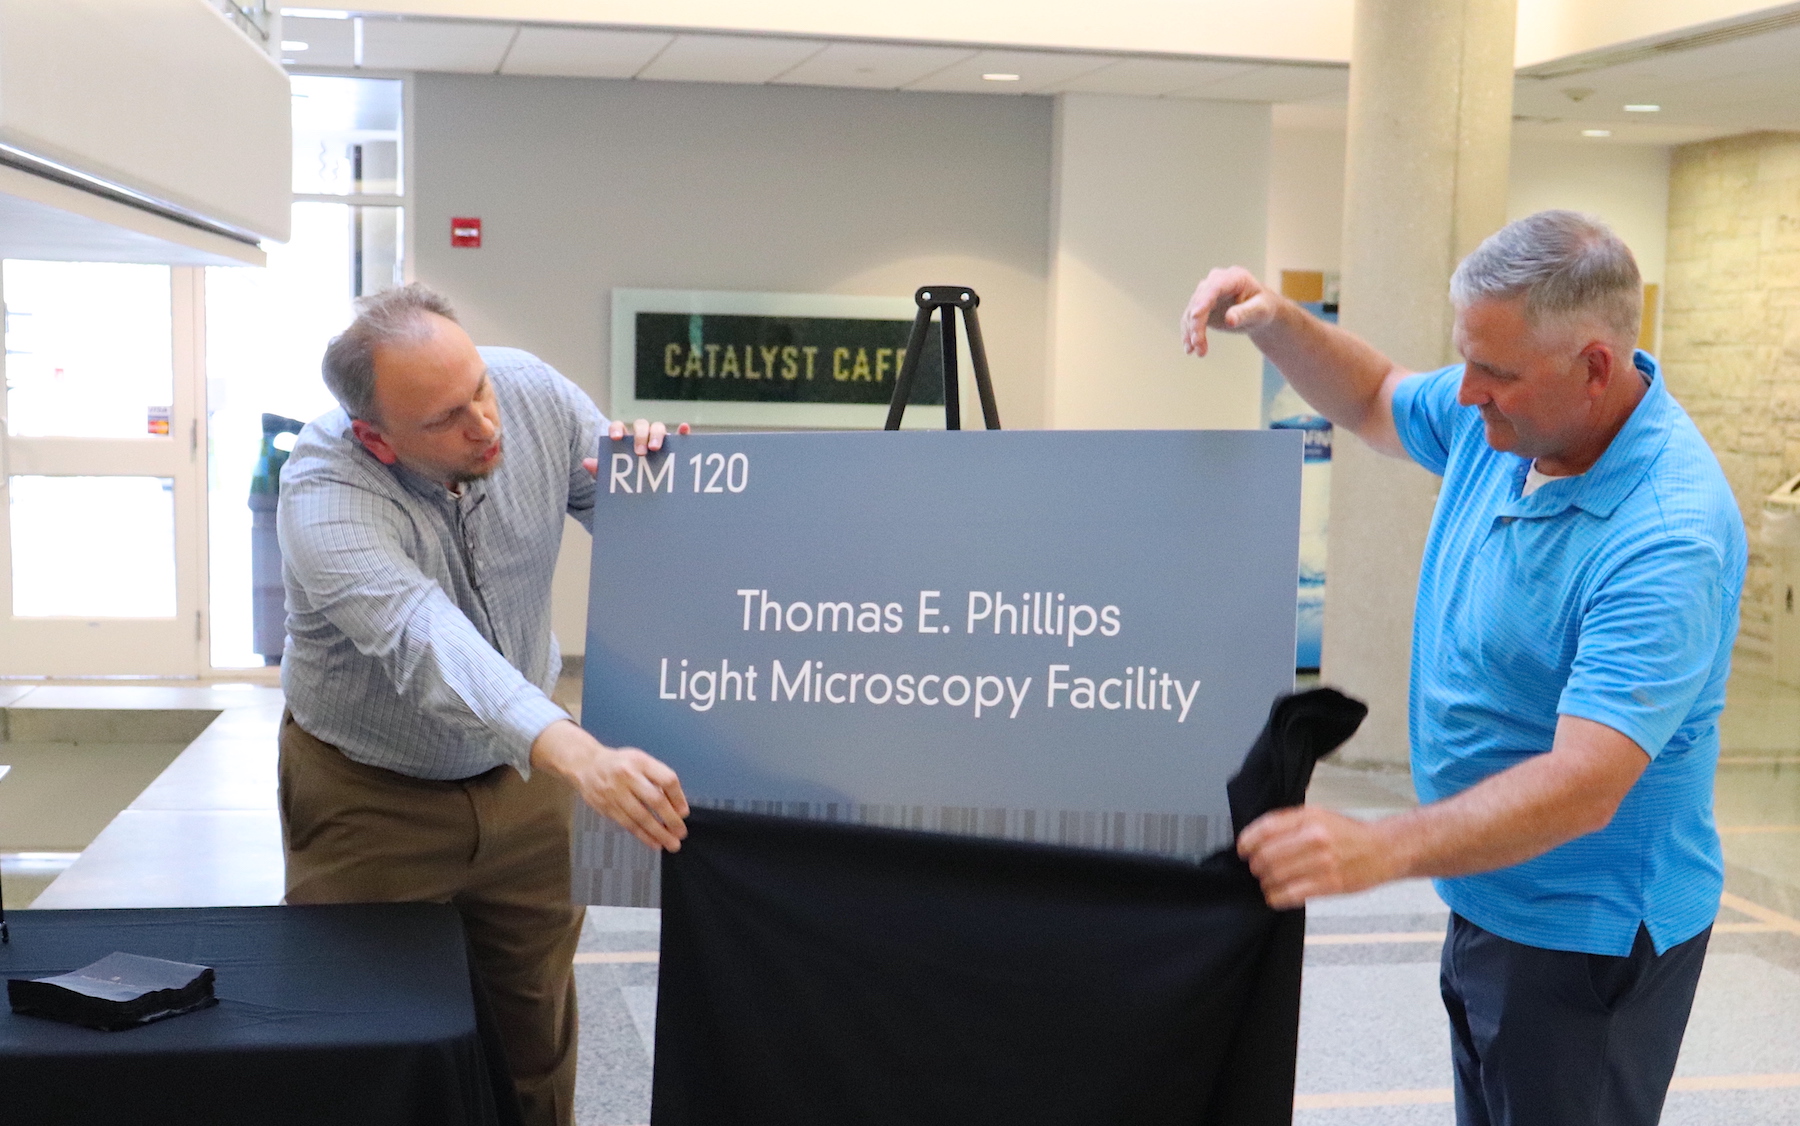 The Thomas E. Phillips Light Microscopy Facility sign is unveiled.